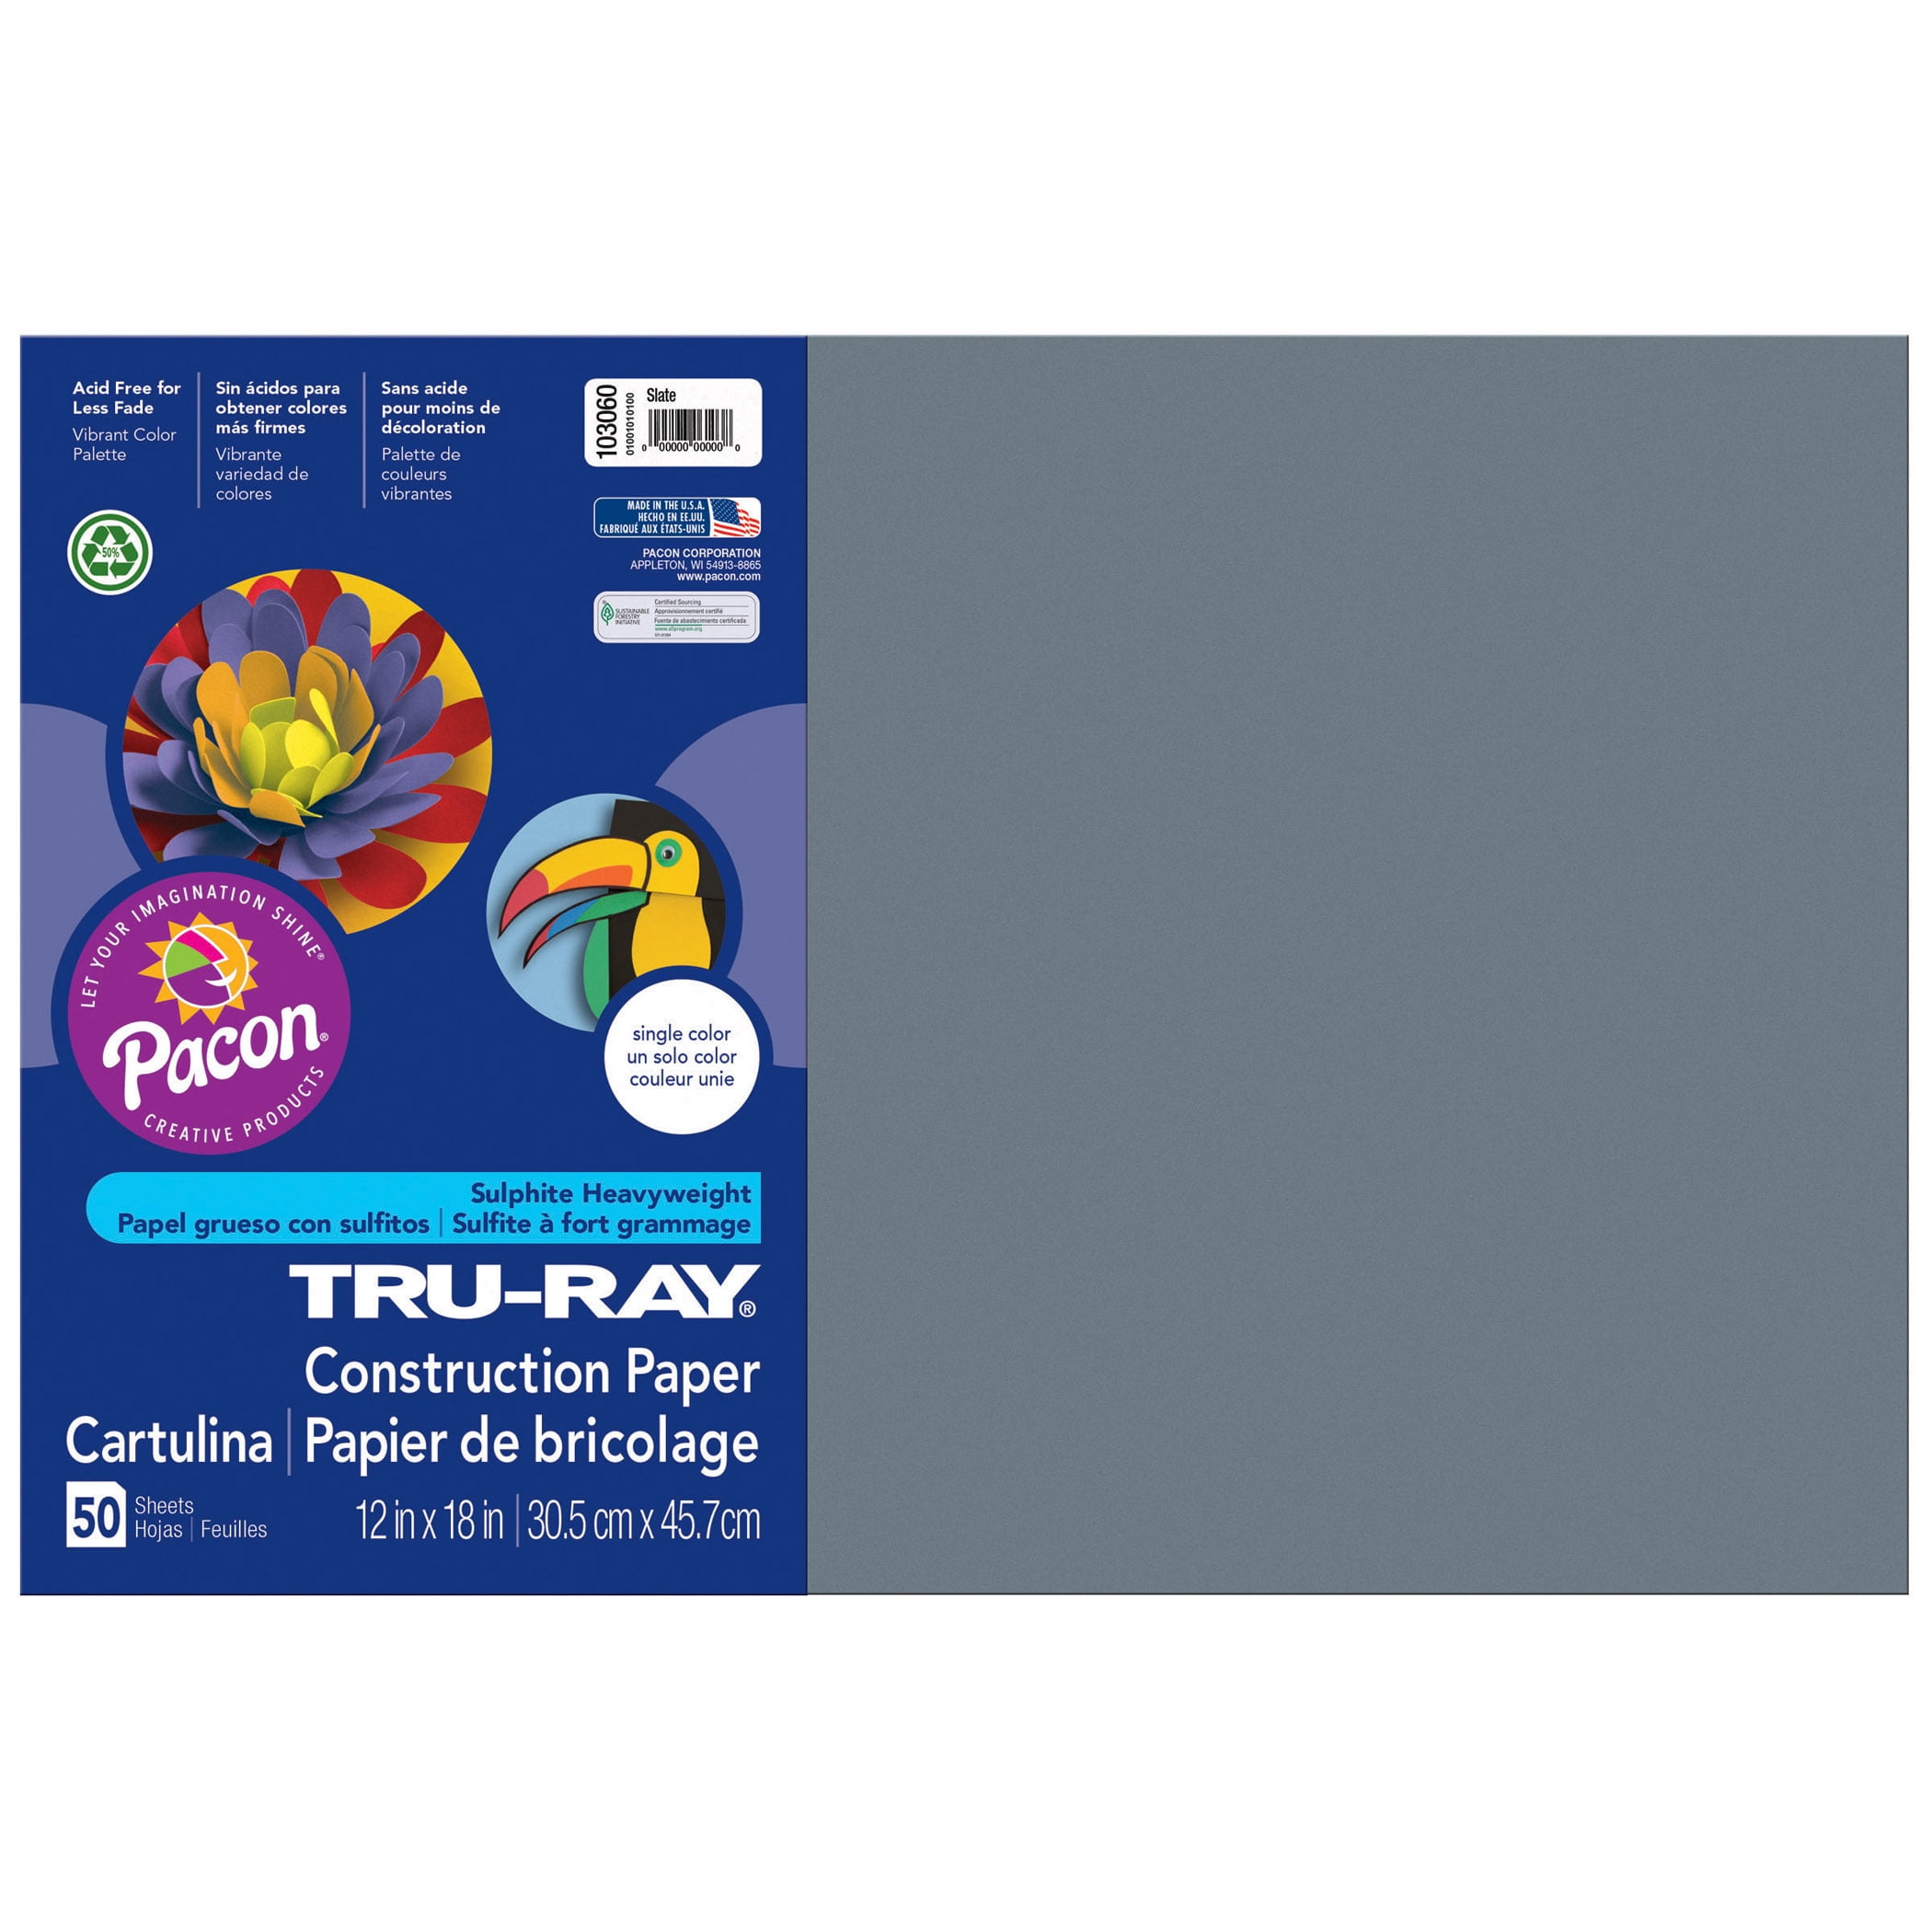 Tru-Ray® Construction Paper Smart-Stack™ - 120 Sheets, Supplies